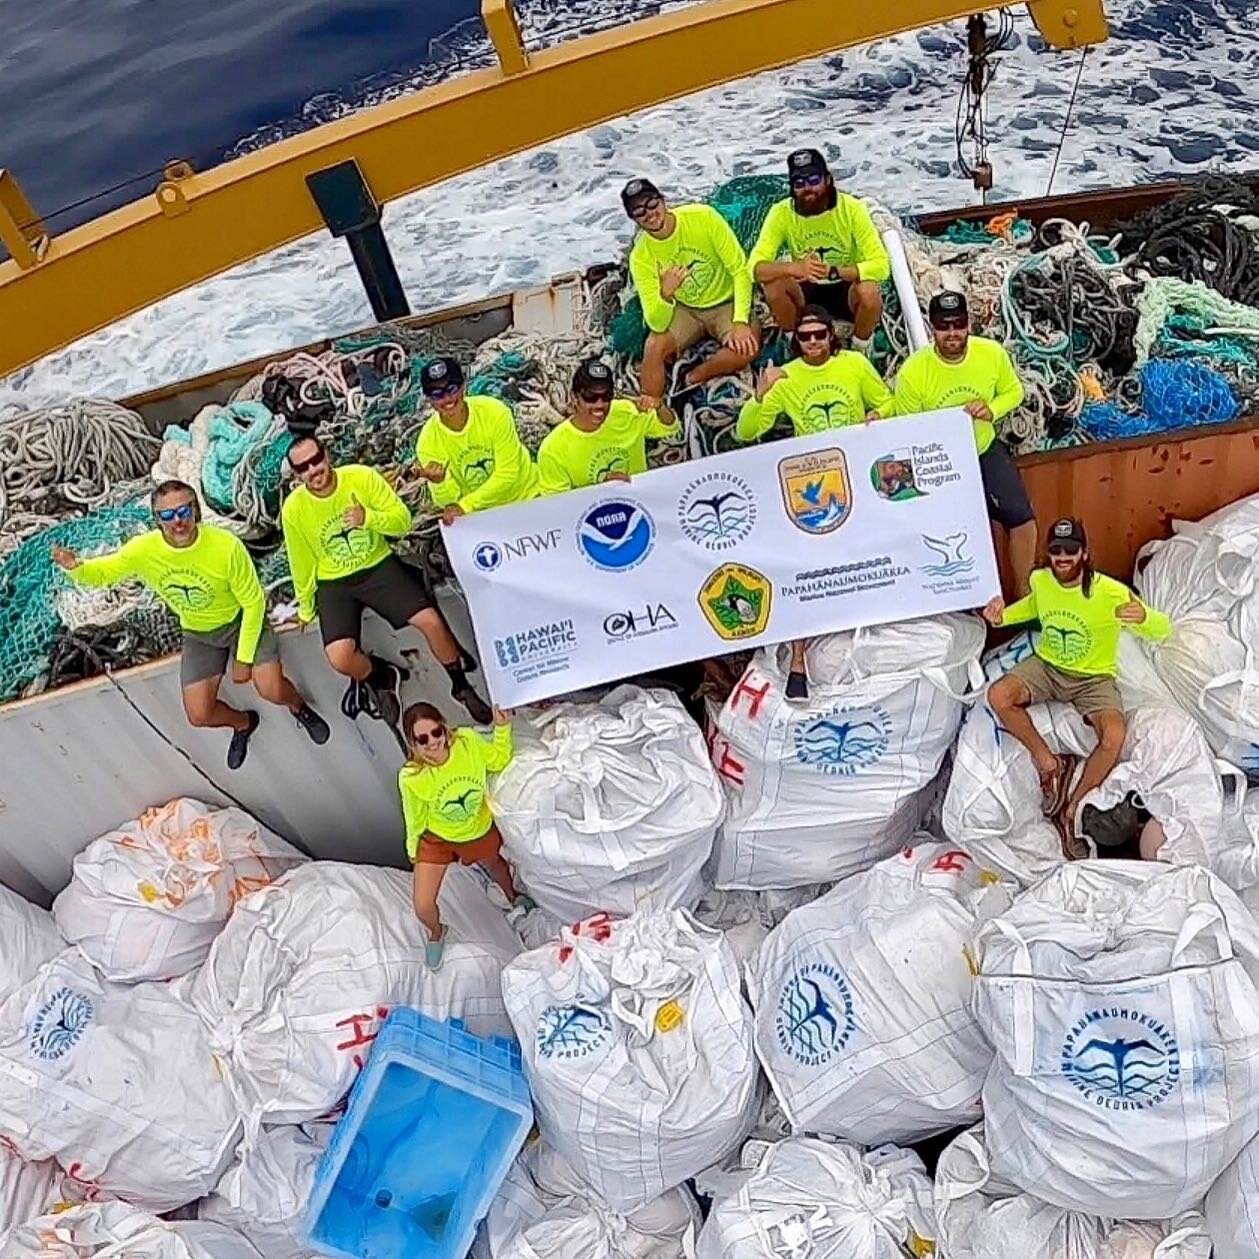 We&rsquo;d like to send a huge thank you to the government agencies that were instrumental in the execution of our Spring 2021 Mission. Mahalo nui to @noaa, @usfws, @hawaiidlnr, @noaasanctuaries, and @oha, for your valuable partnership as we work tog